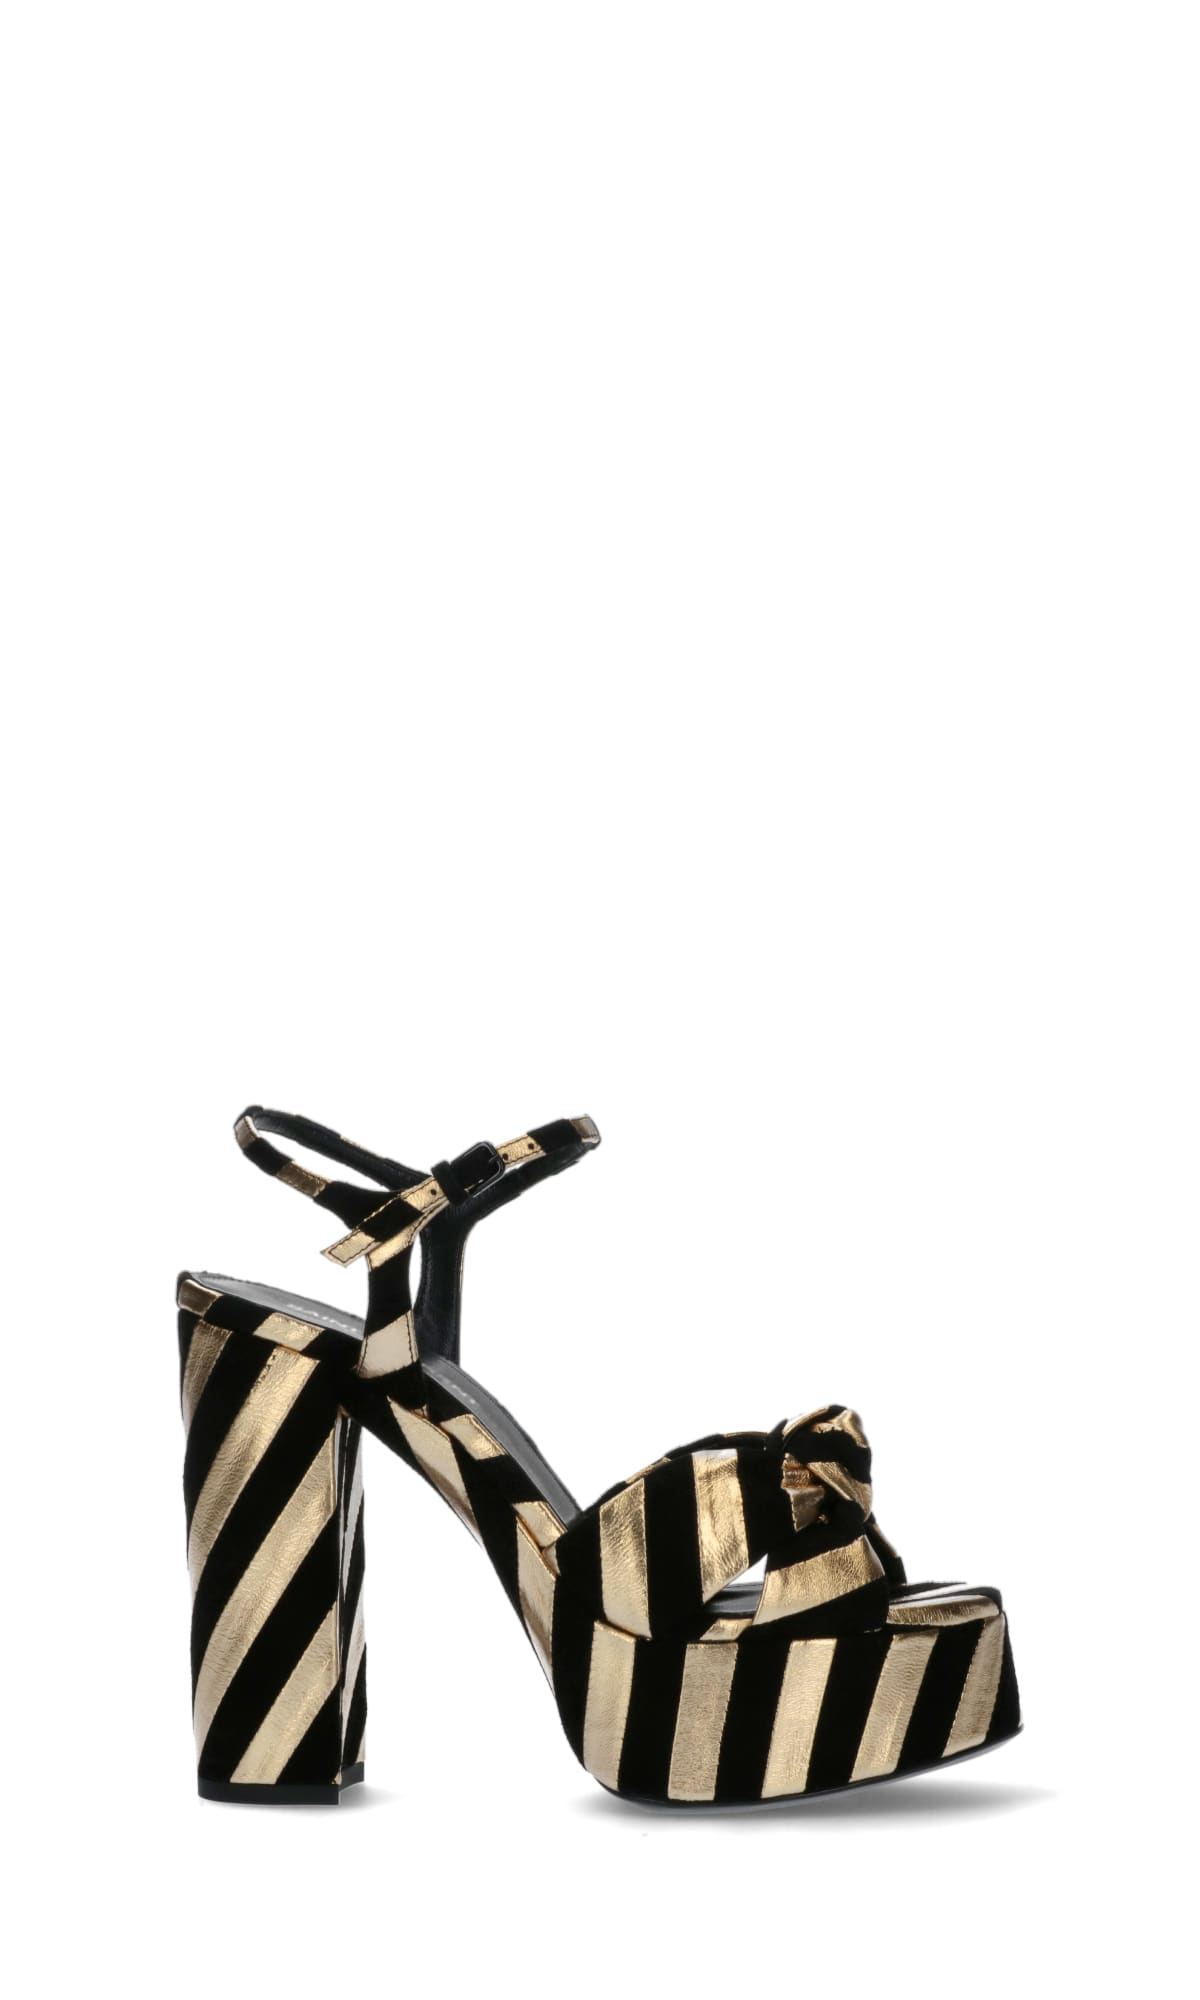 Saint Laurent Bianca Knotted Suede And Metallic Textured-leather Platform Sandals In Black Gold